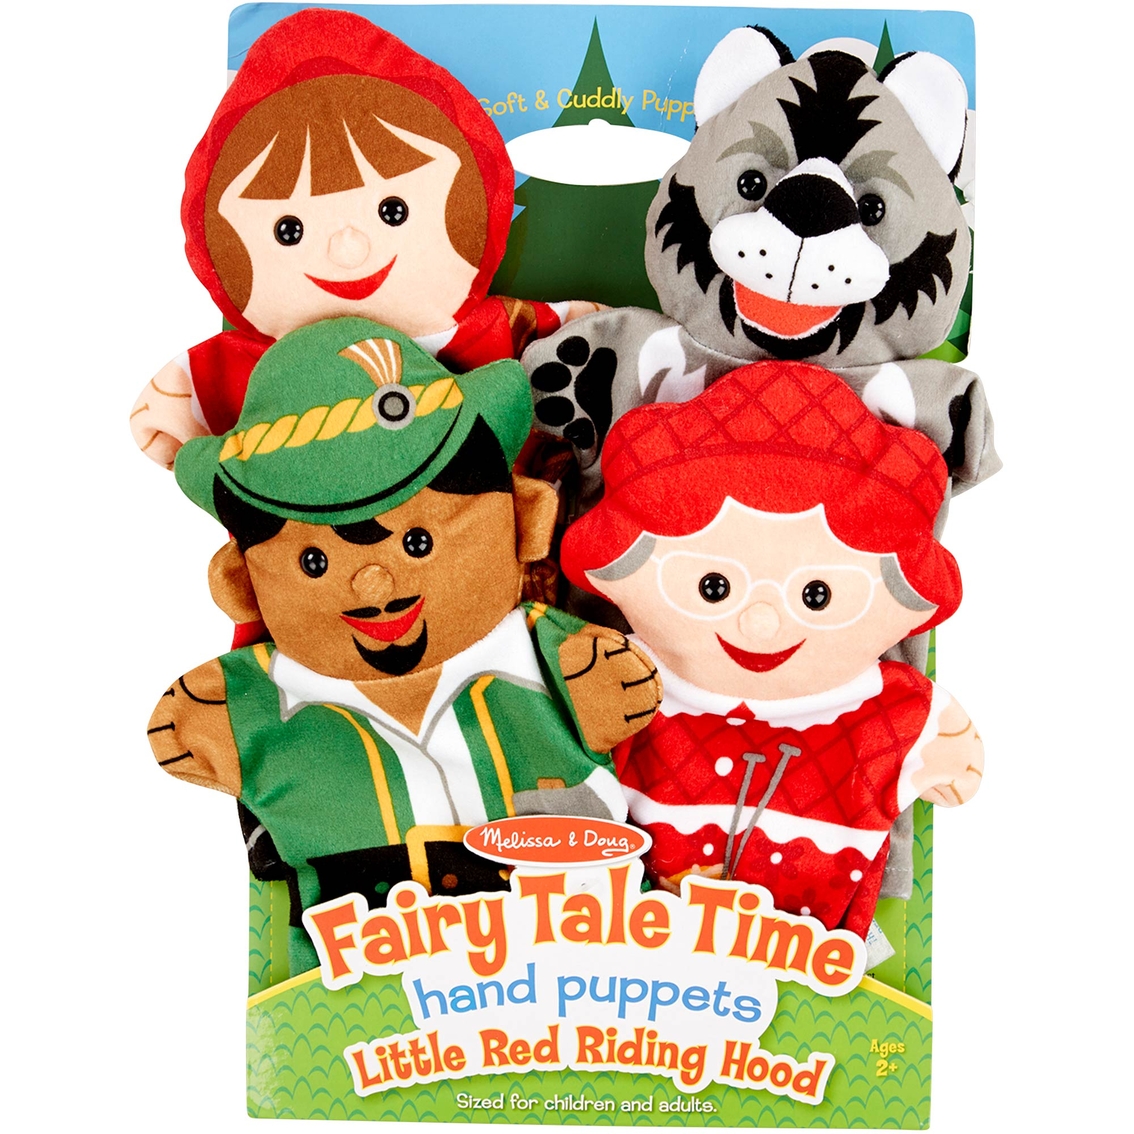 Melissa & Doug Fairy Tale Time Little Red Riding Hood 4pcs Hand Puppets for sale online 